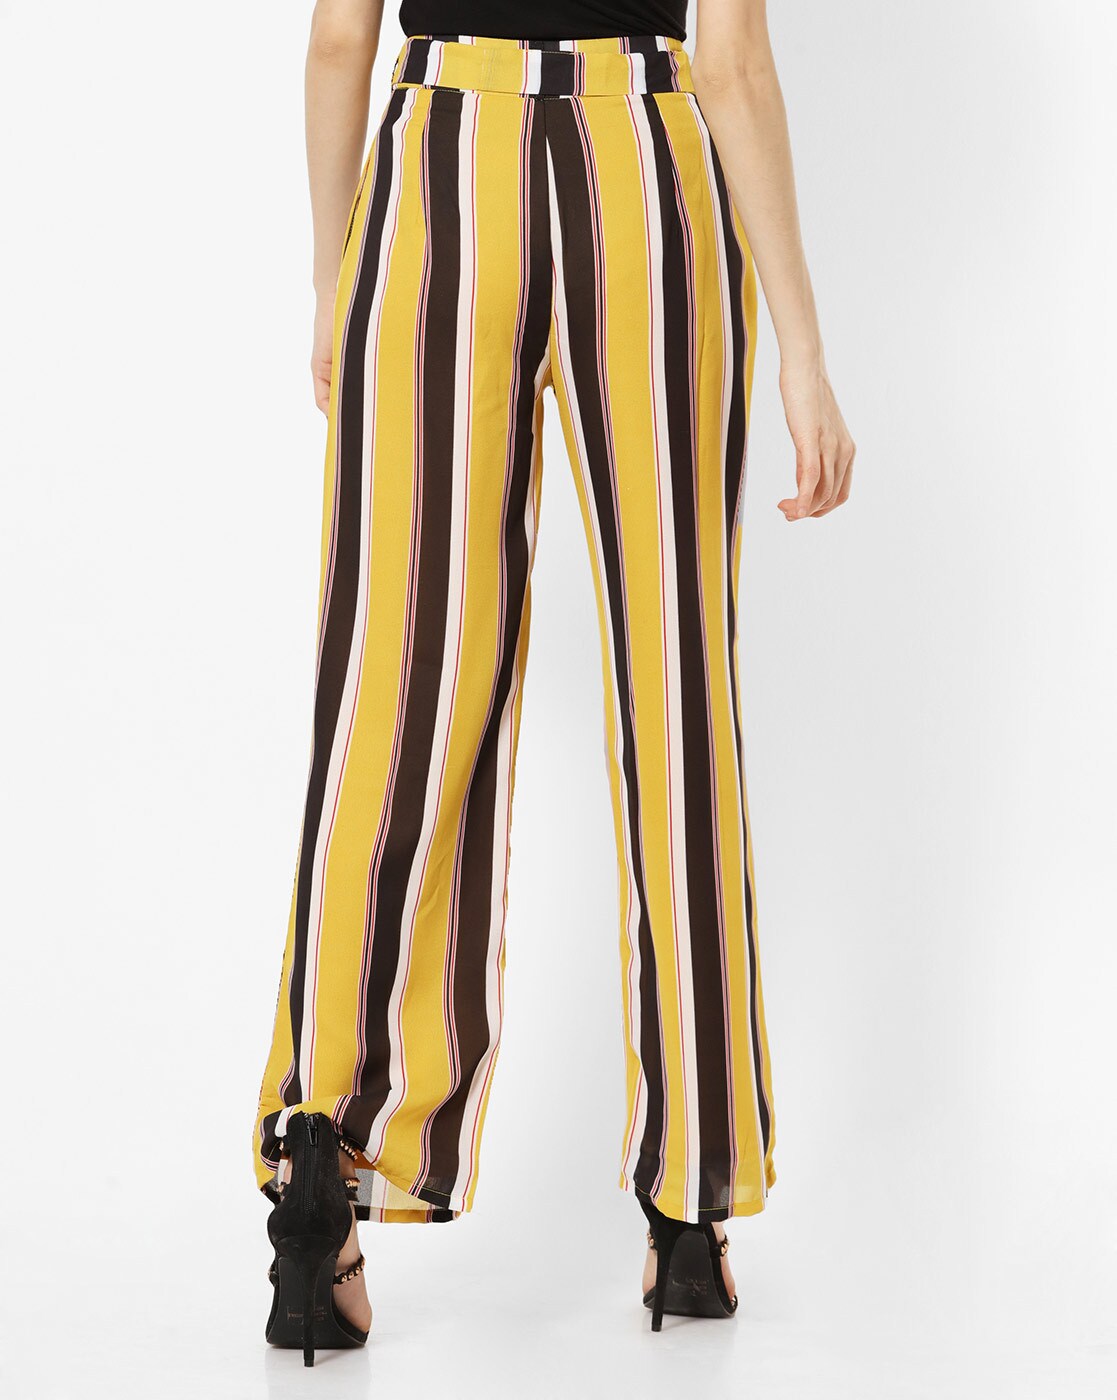 Buy Yellow Trousers  Pants for Women by FABALLEY Online  Ajiocom